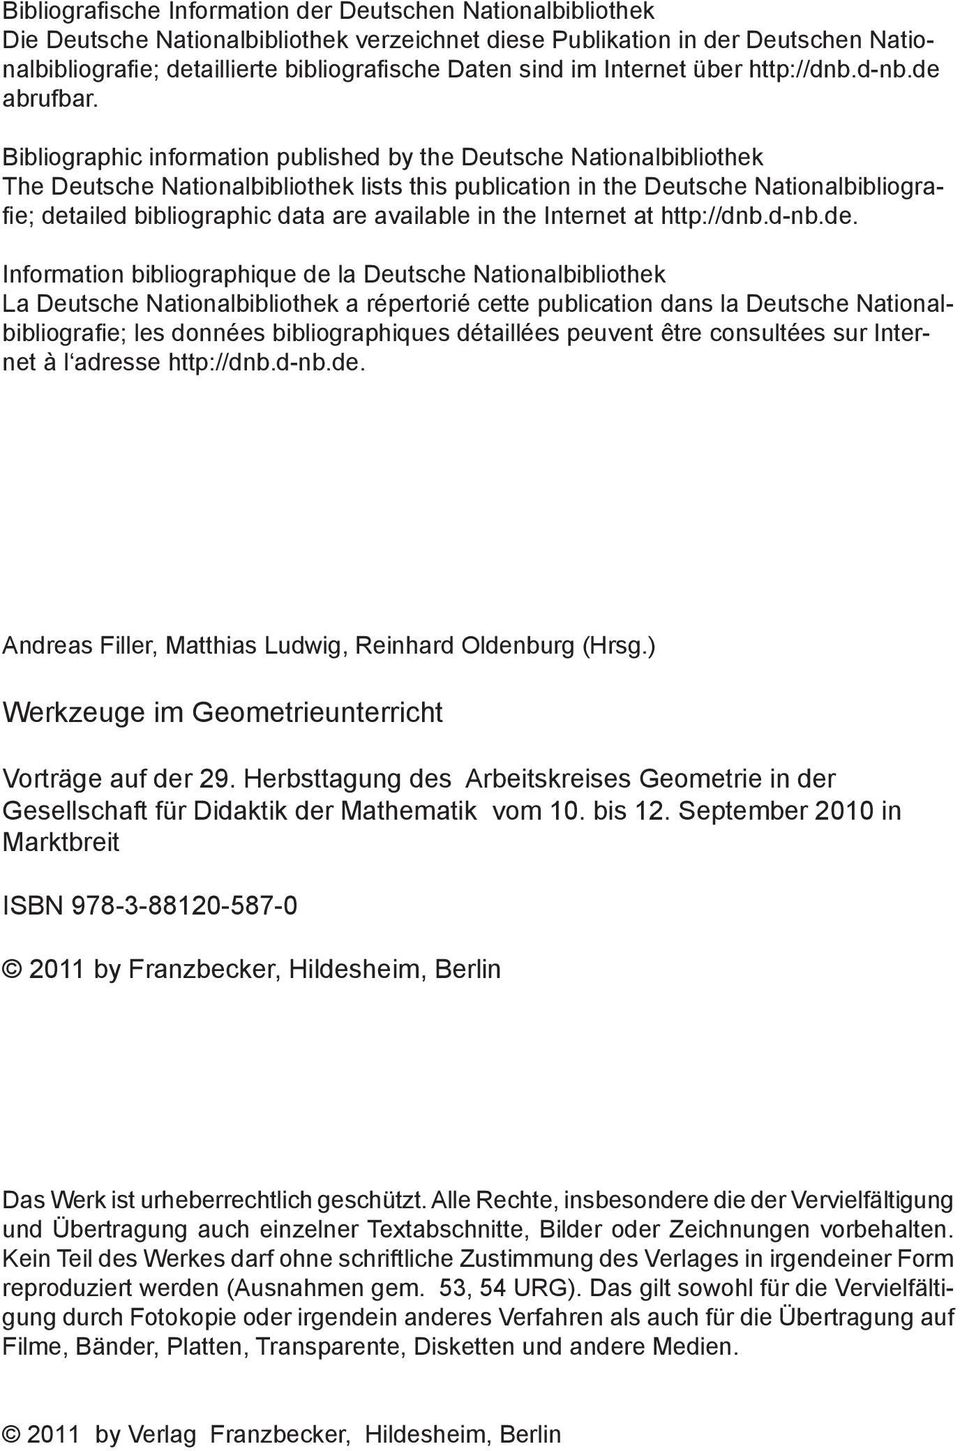 Bibliographic information published by the Deutsche Nationalbibliothek The Deutsche Nationalbibliothek lists this publication in the Deutsche Nationalbibliografie; detailed bibliographic data are